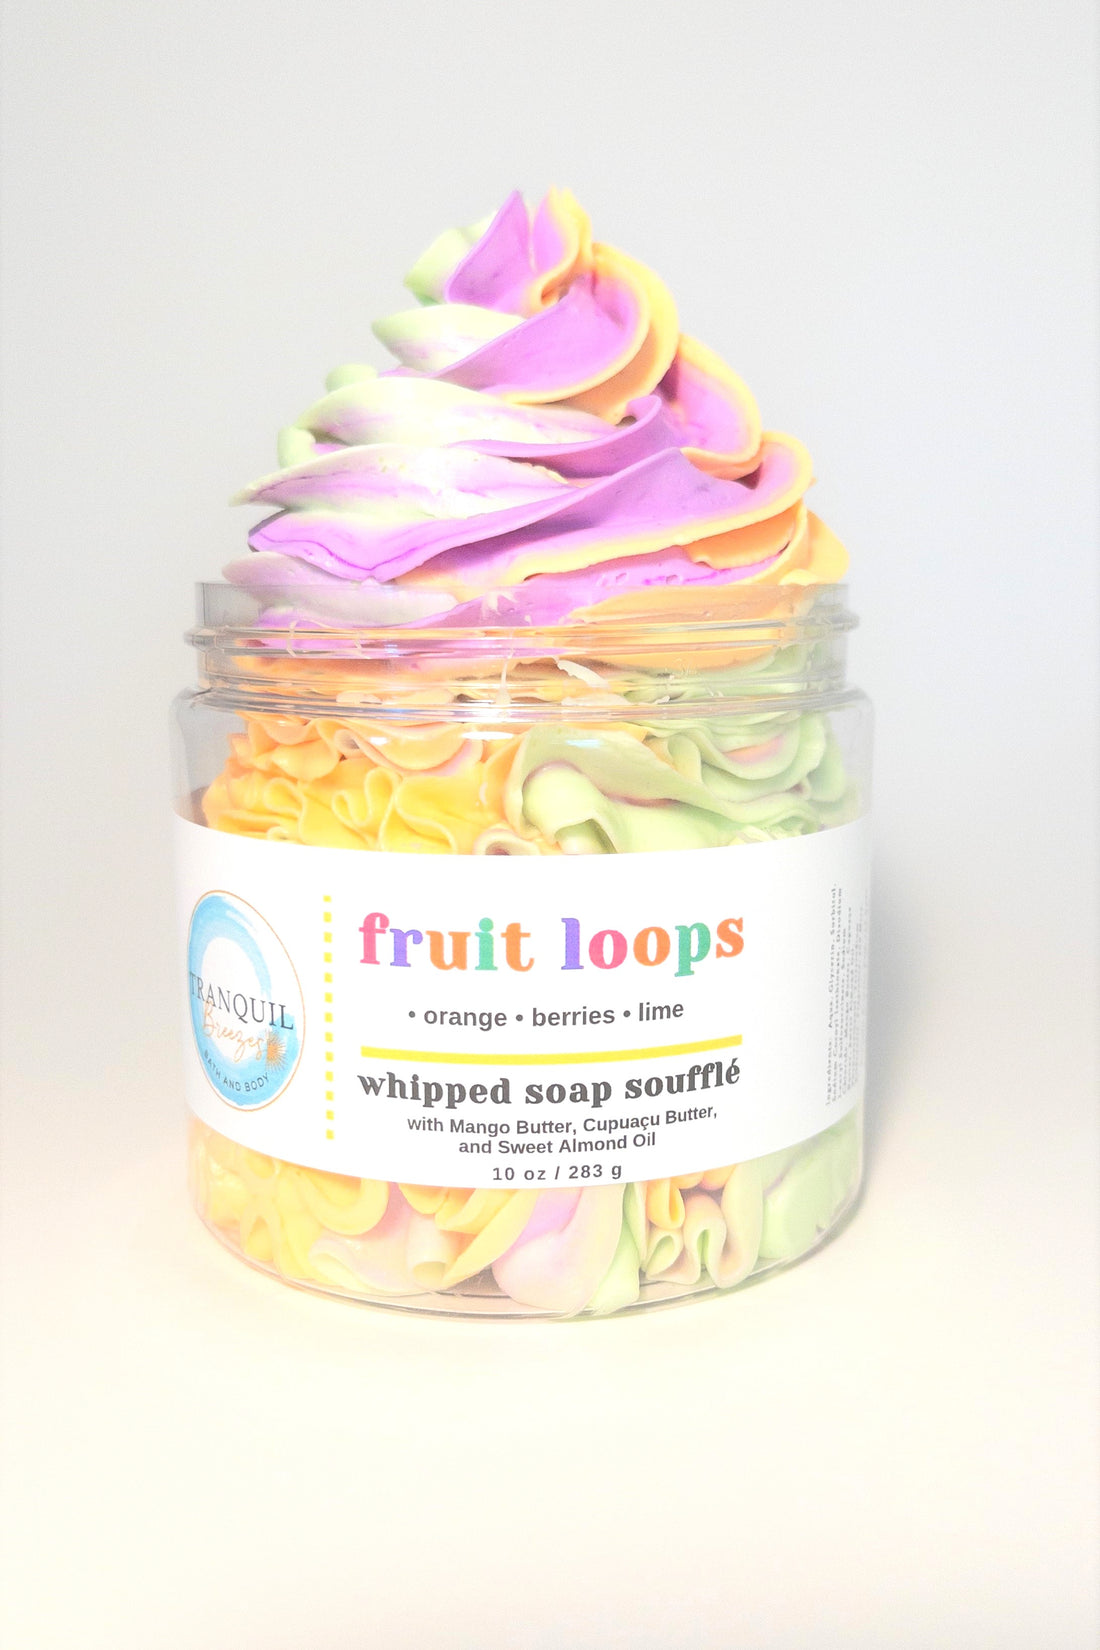 Fruit Loops Whipped Soap Soufflé